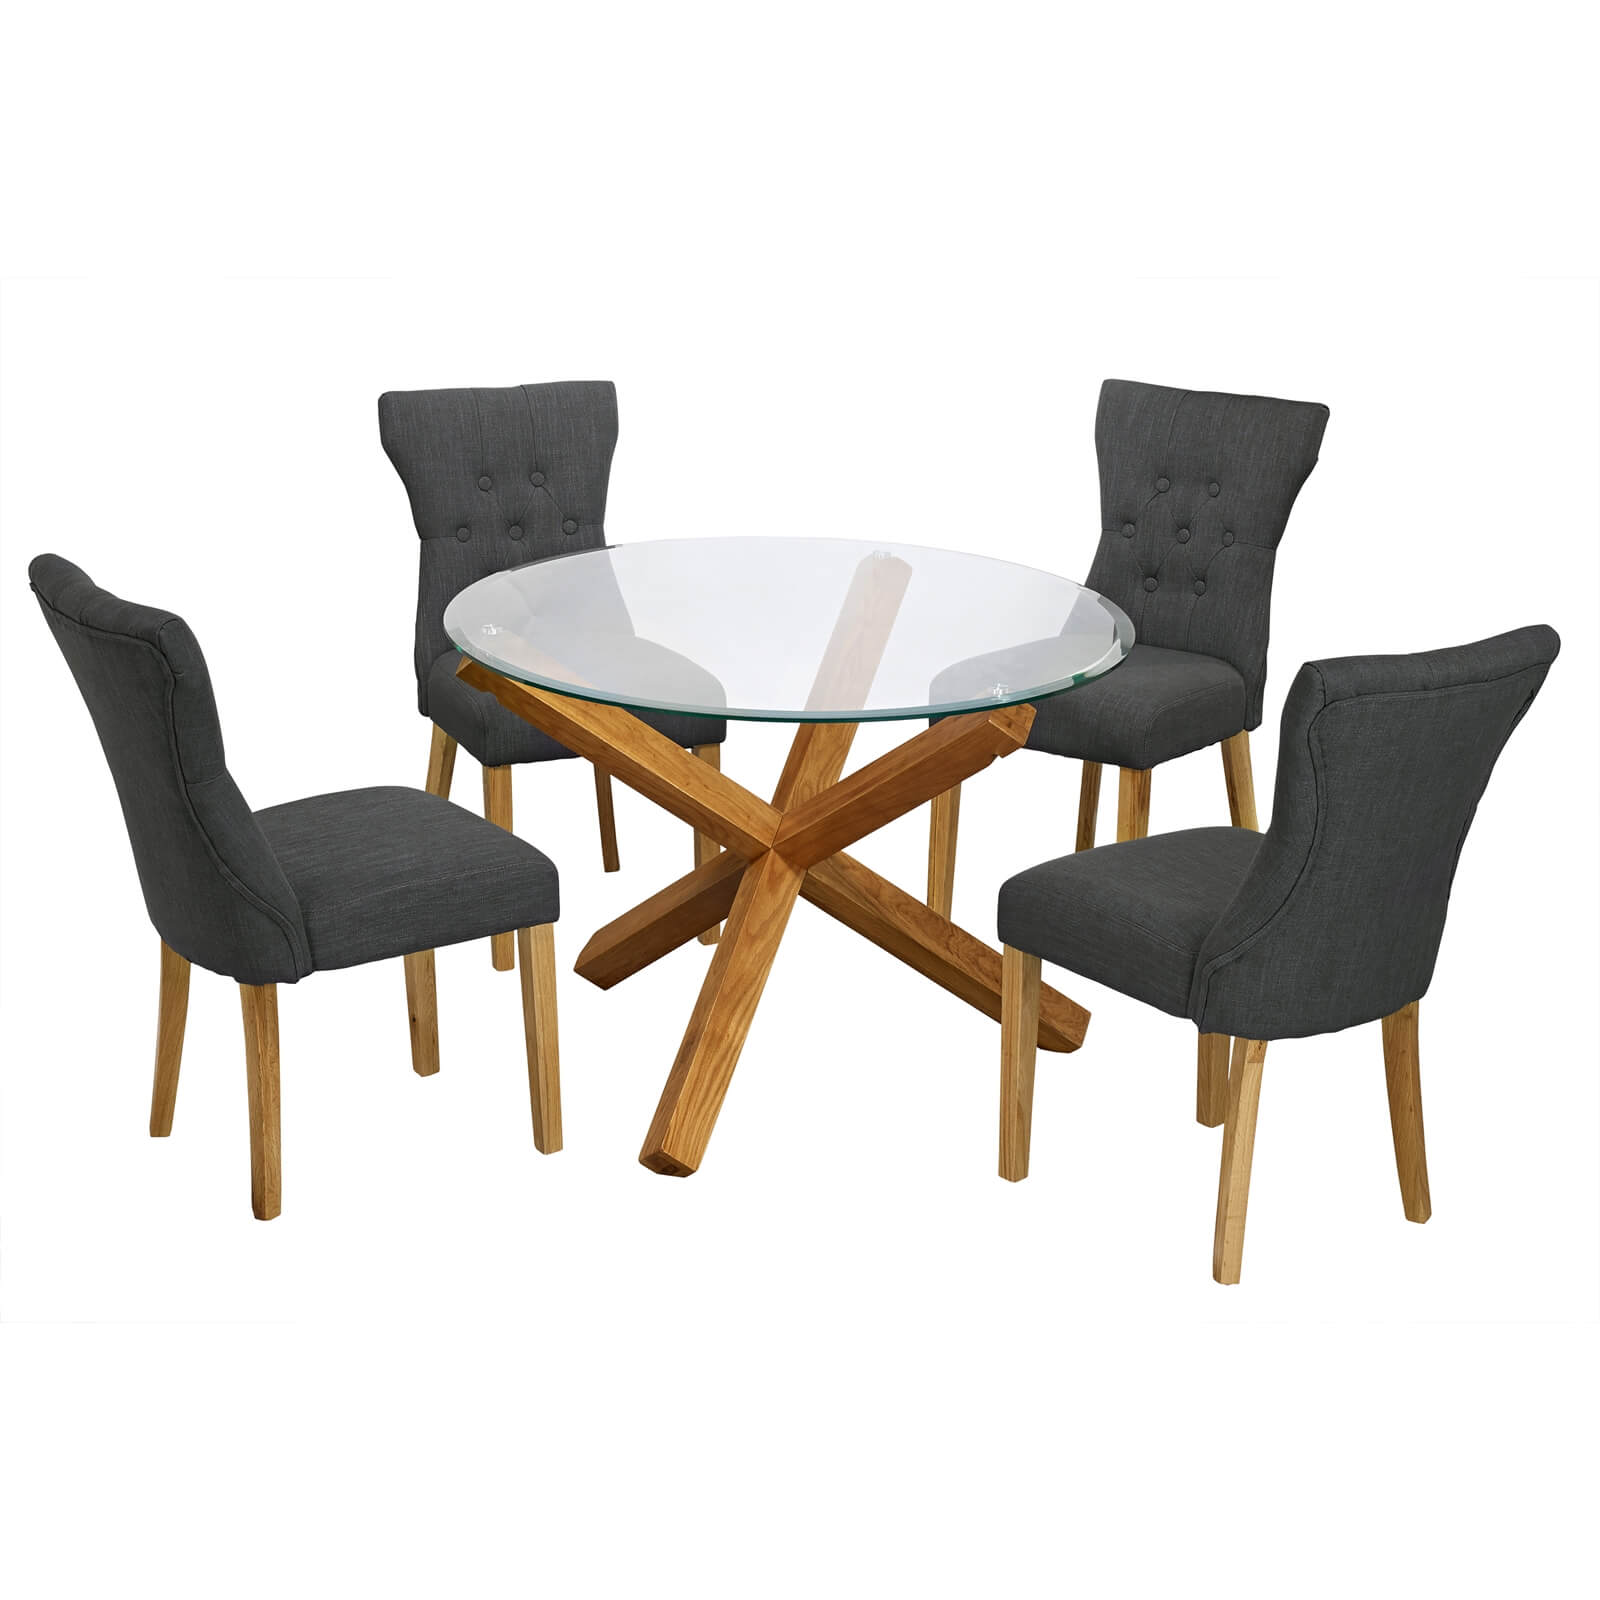 Oporto 4 Seater Dining Set - Naples Dining Chairs - Grey